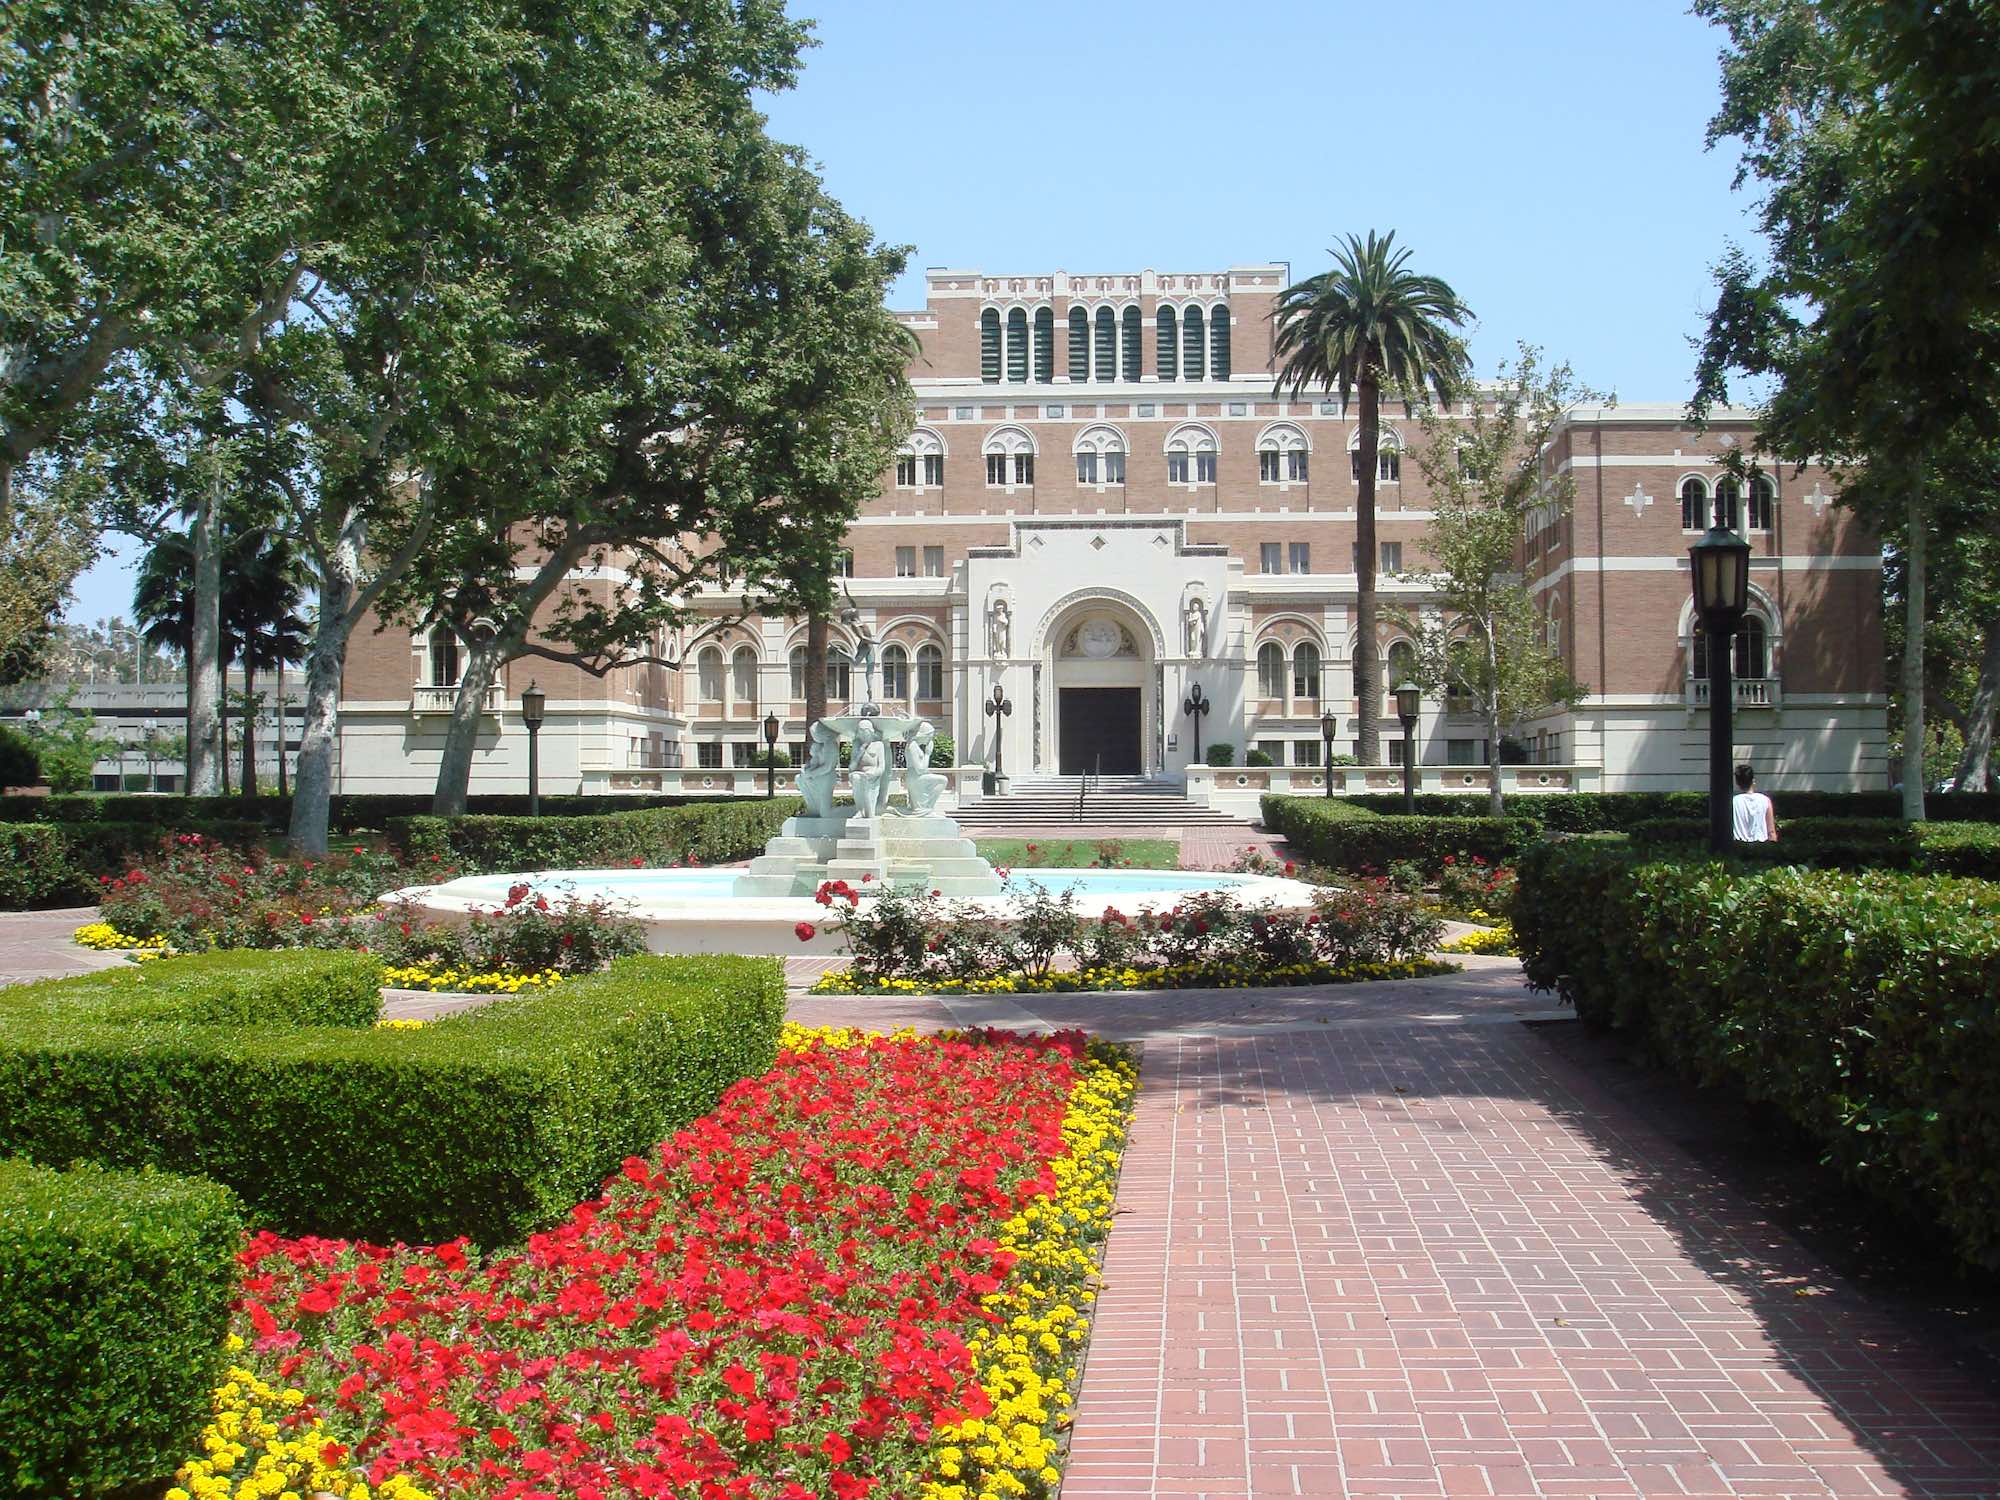 4 University of Southern California (USC) Essays That Worked